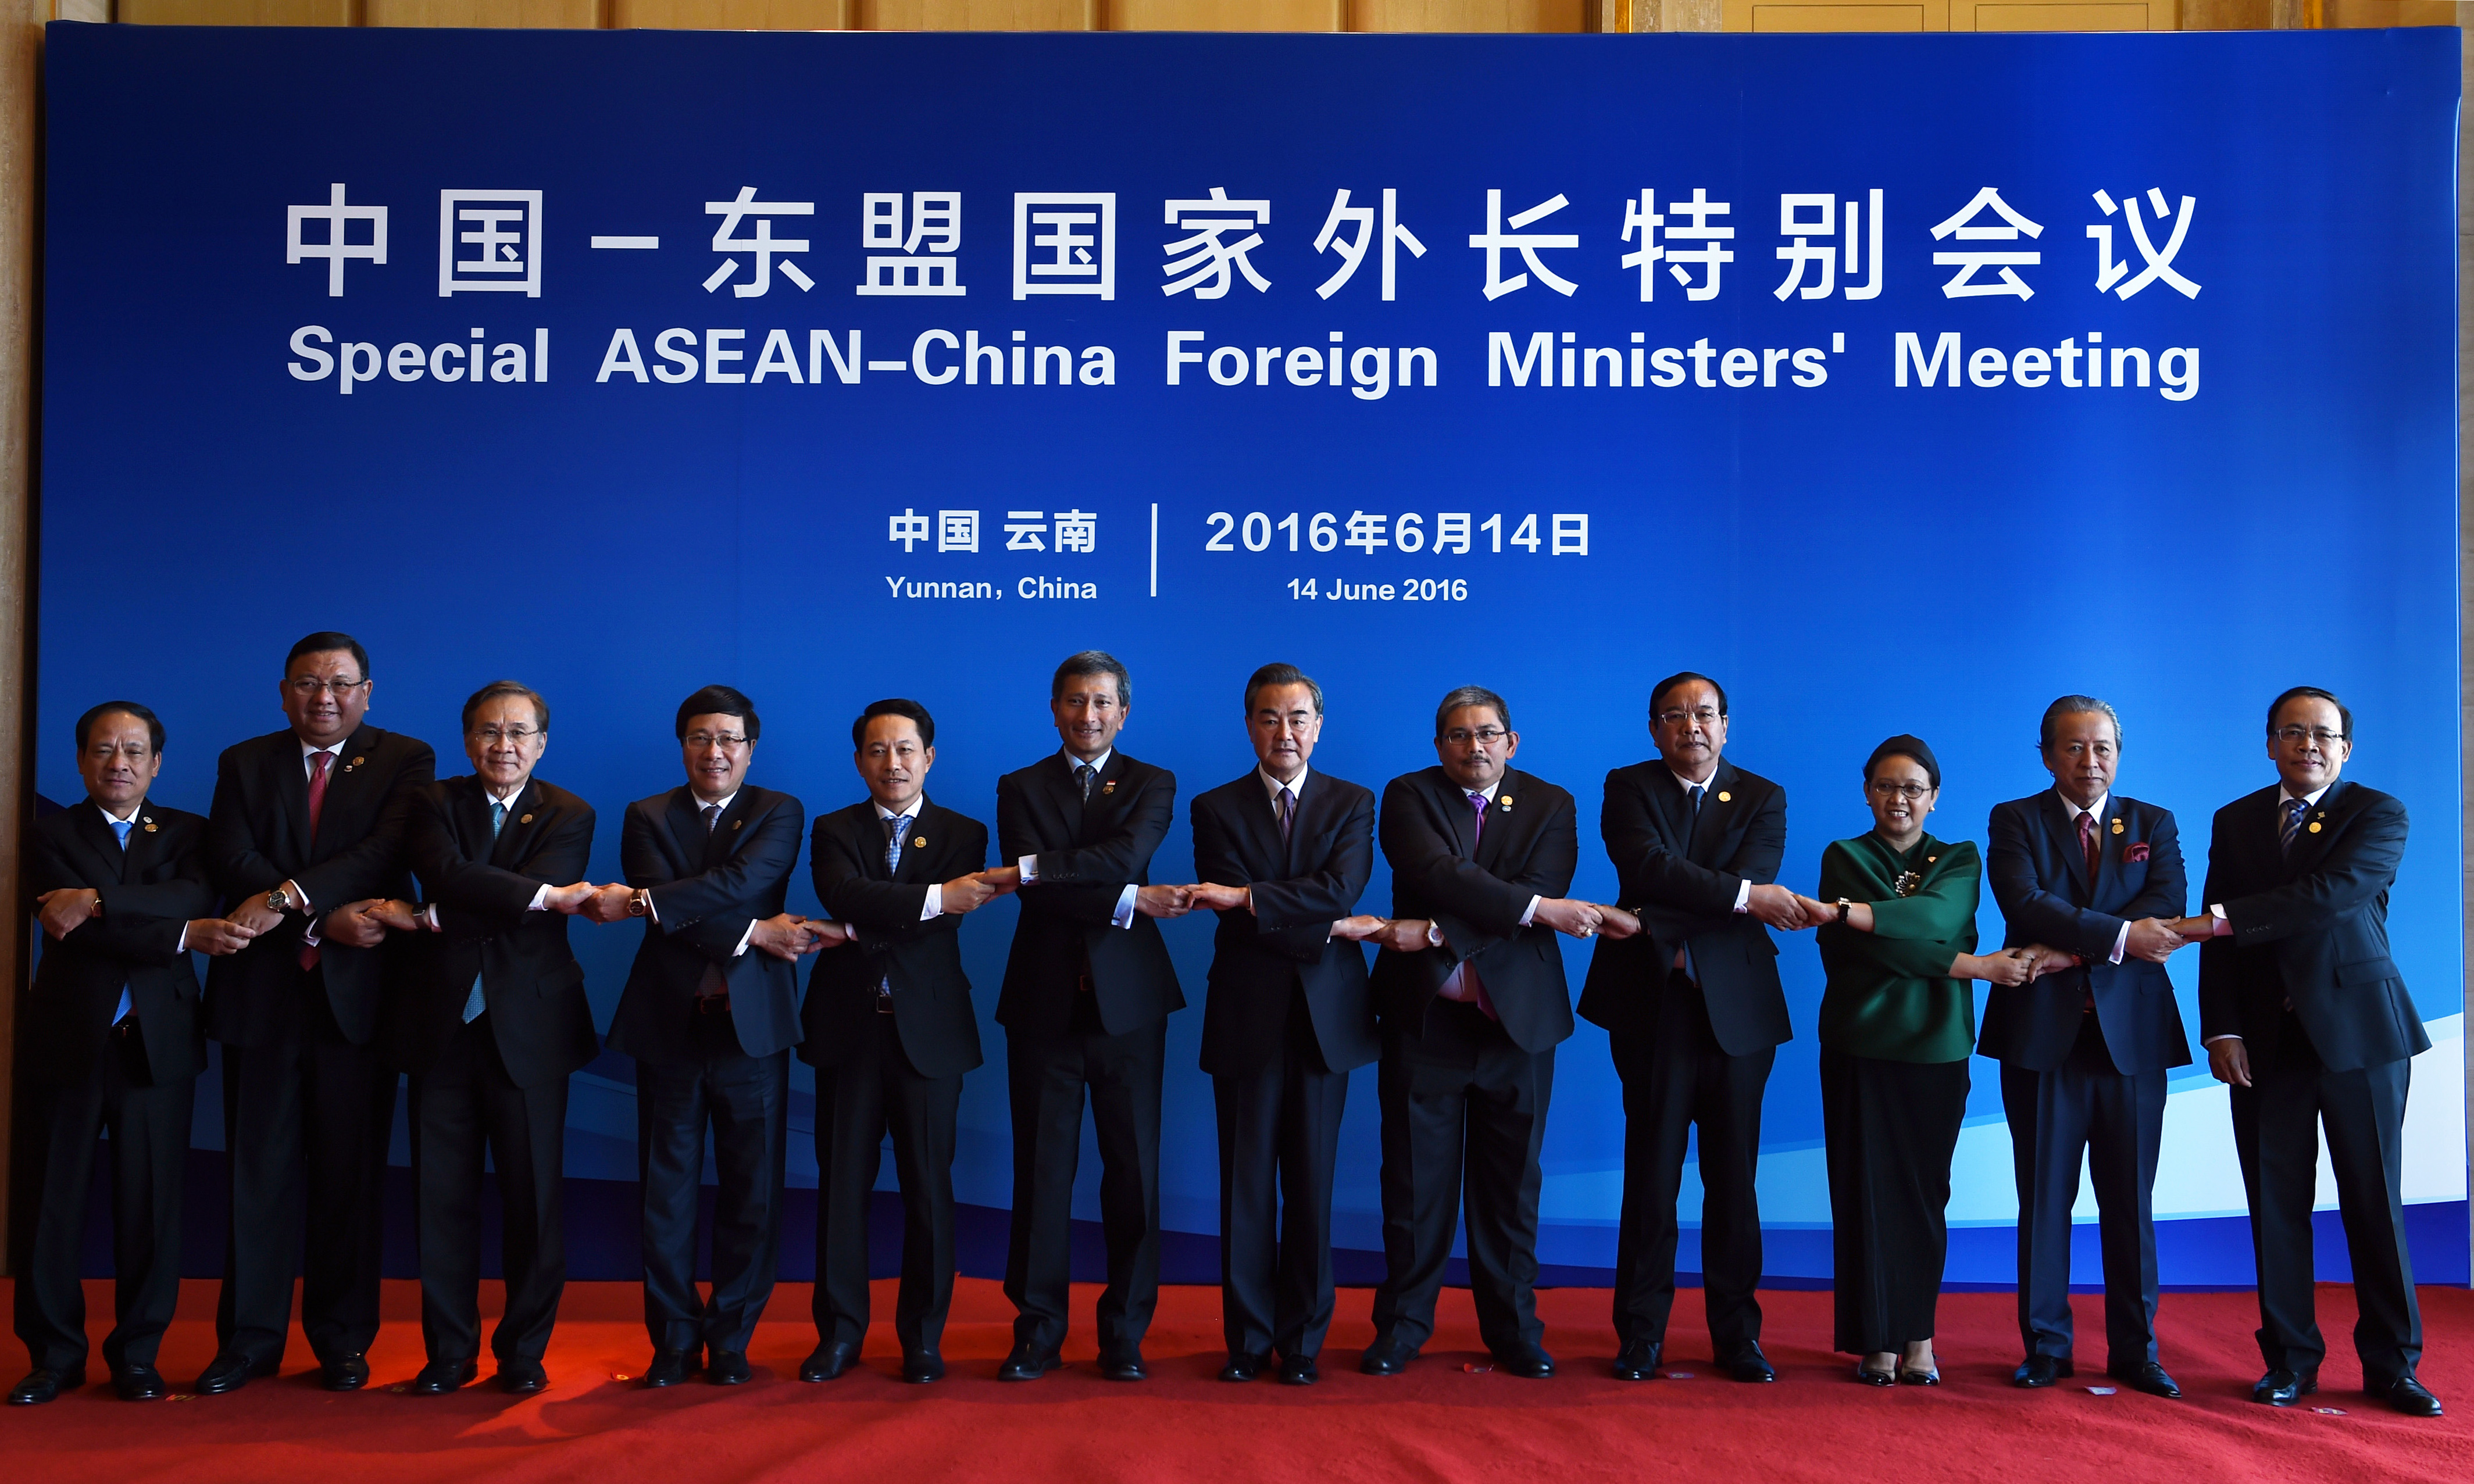 Chinese Foreign Minister Wang Yi (6th R) and foreign ministers from ASEAN-member nations pose for a group photo during a special ASEAN-China foreign ministers' meeting in Yuxi, southwest China's Yunnan Province on June 14, 2016. Countries in Southeast Asia have "serious concerns" over recent events in the disputed South China Sea, an unusually strongly worded communique issued by their foreign ministers in China said on June 14. / AFP PHOTO / STR / China OUT